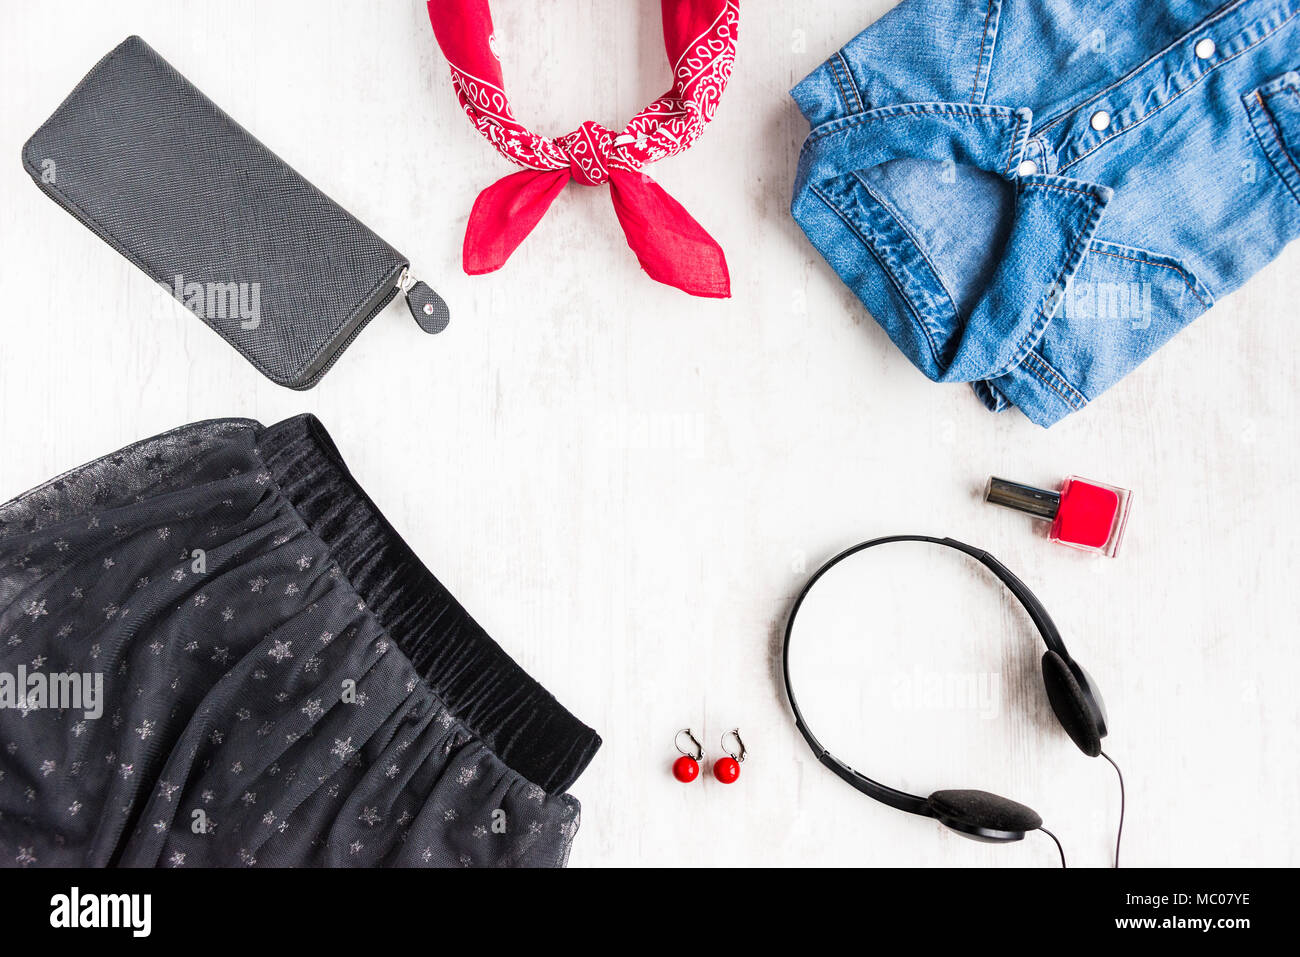 Top view of yong woman clothes and accessories. Tulle skirt, denim shirt, wallet, head phones, earrings, nail polish and kerchief. Urban style concept Stock Photo